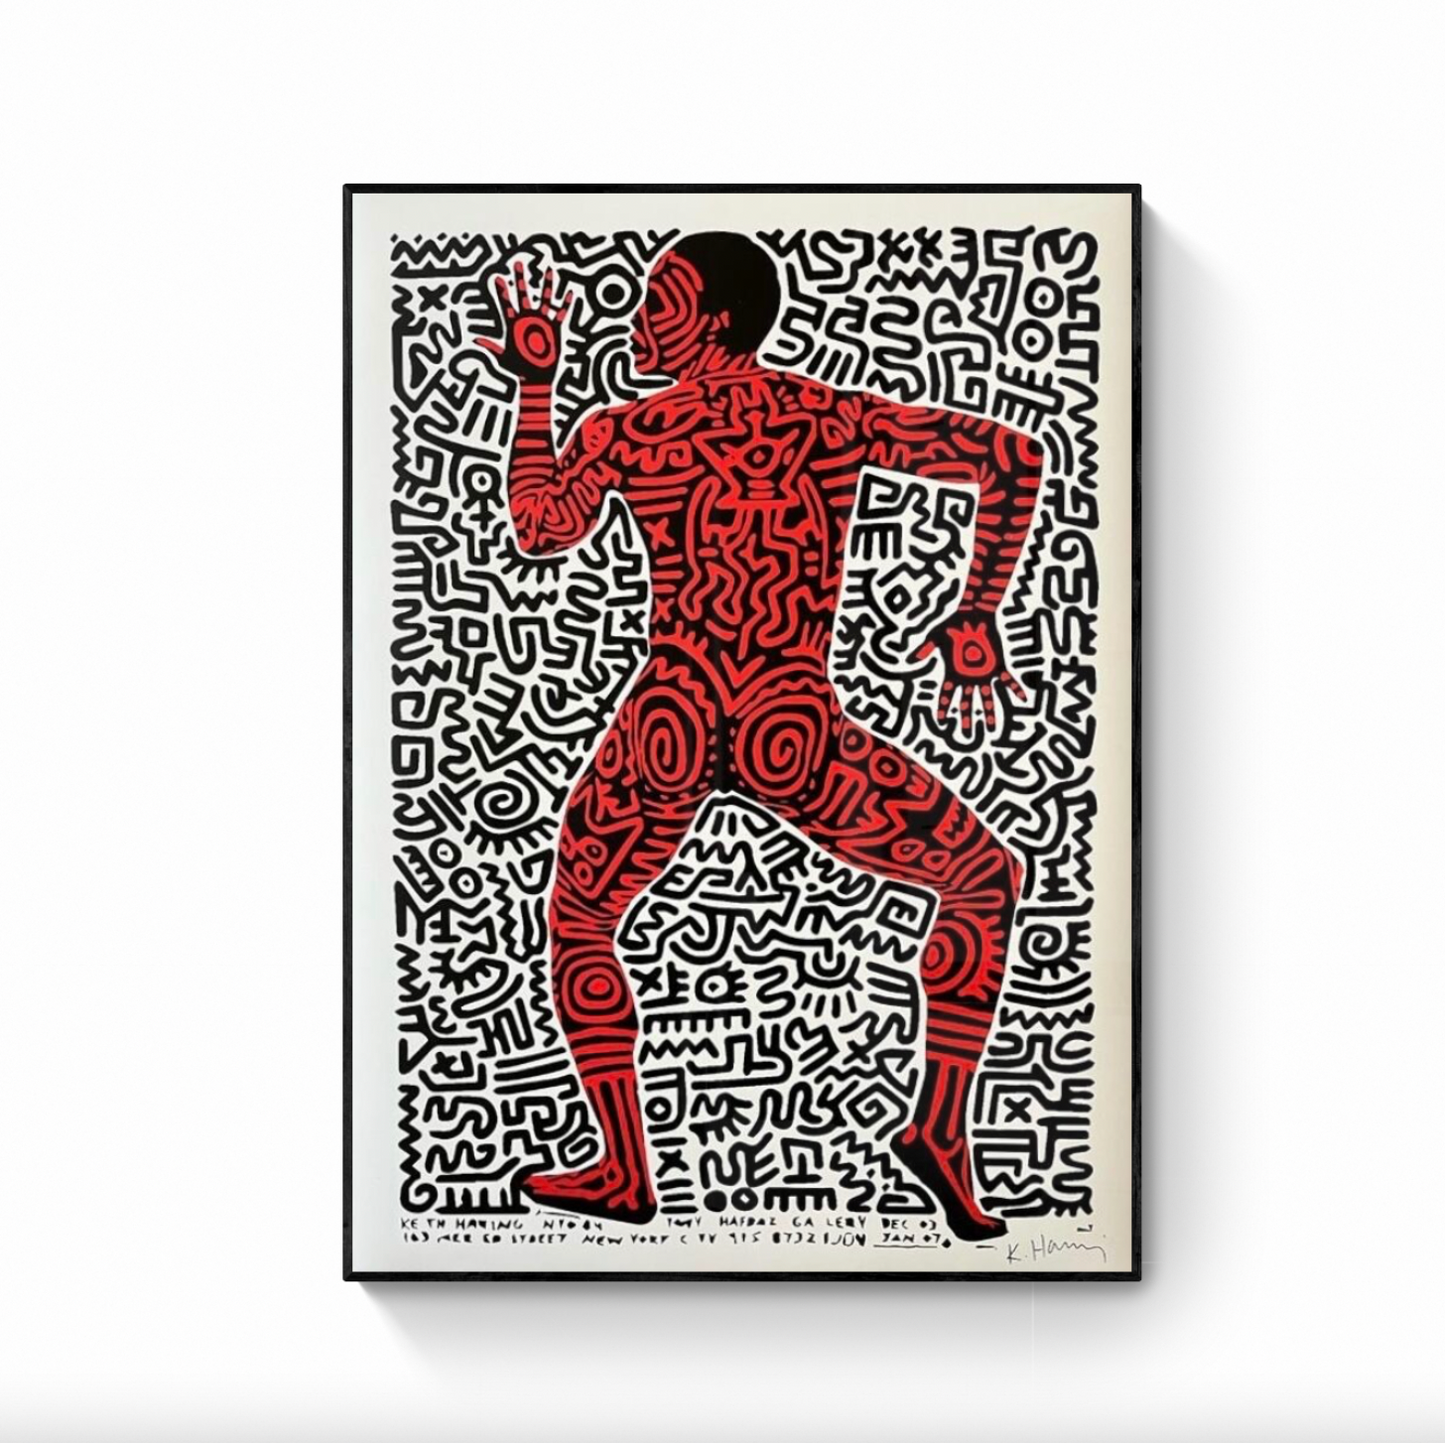 Keith Haring, póster oficial - AHORRA 35%